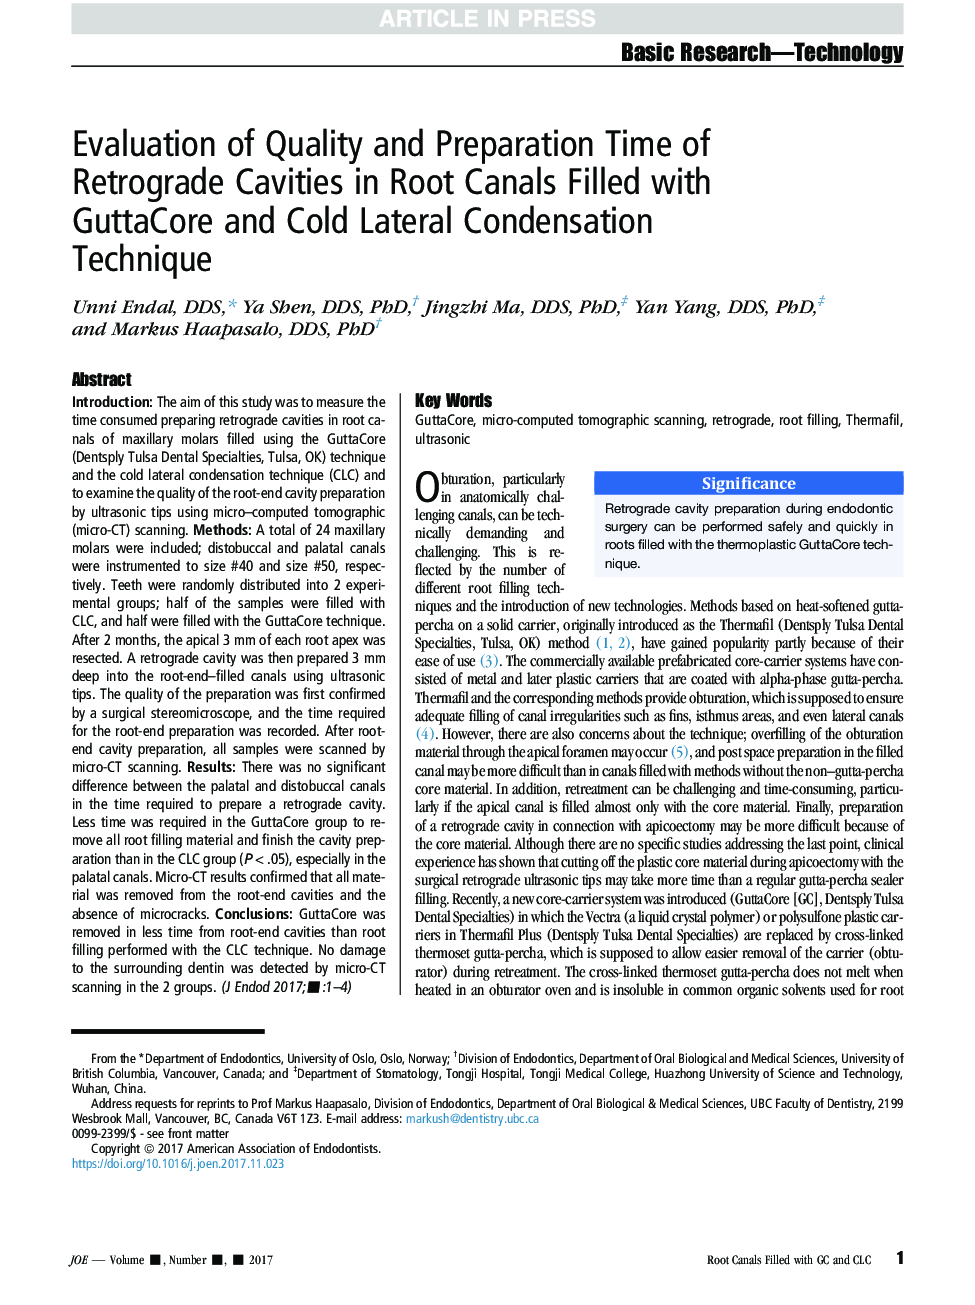 Evaluation of Quality and Preparation Time of Retrograde Cavities in Root Canals Filled with GuttaCore and Cold Lateral Condensation Technique